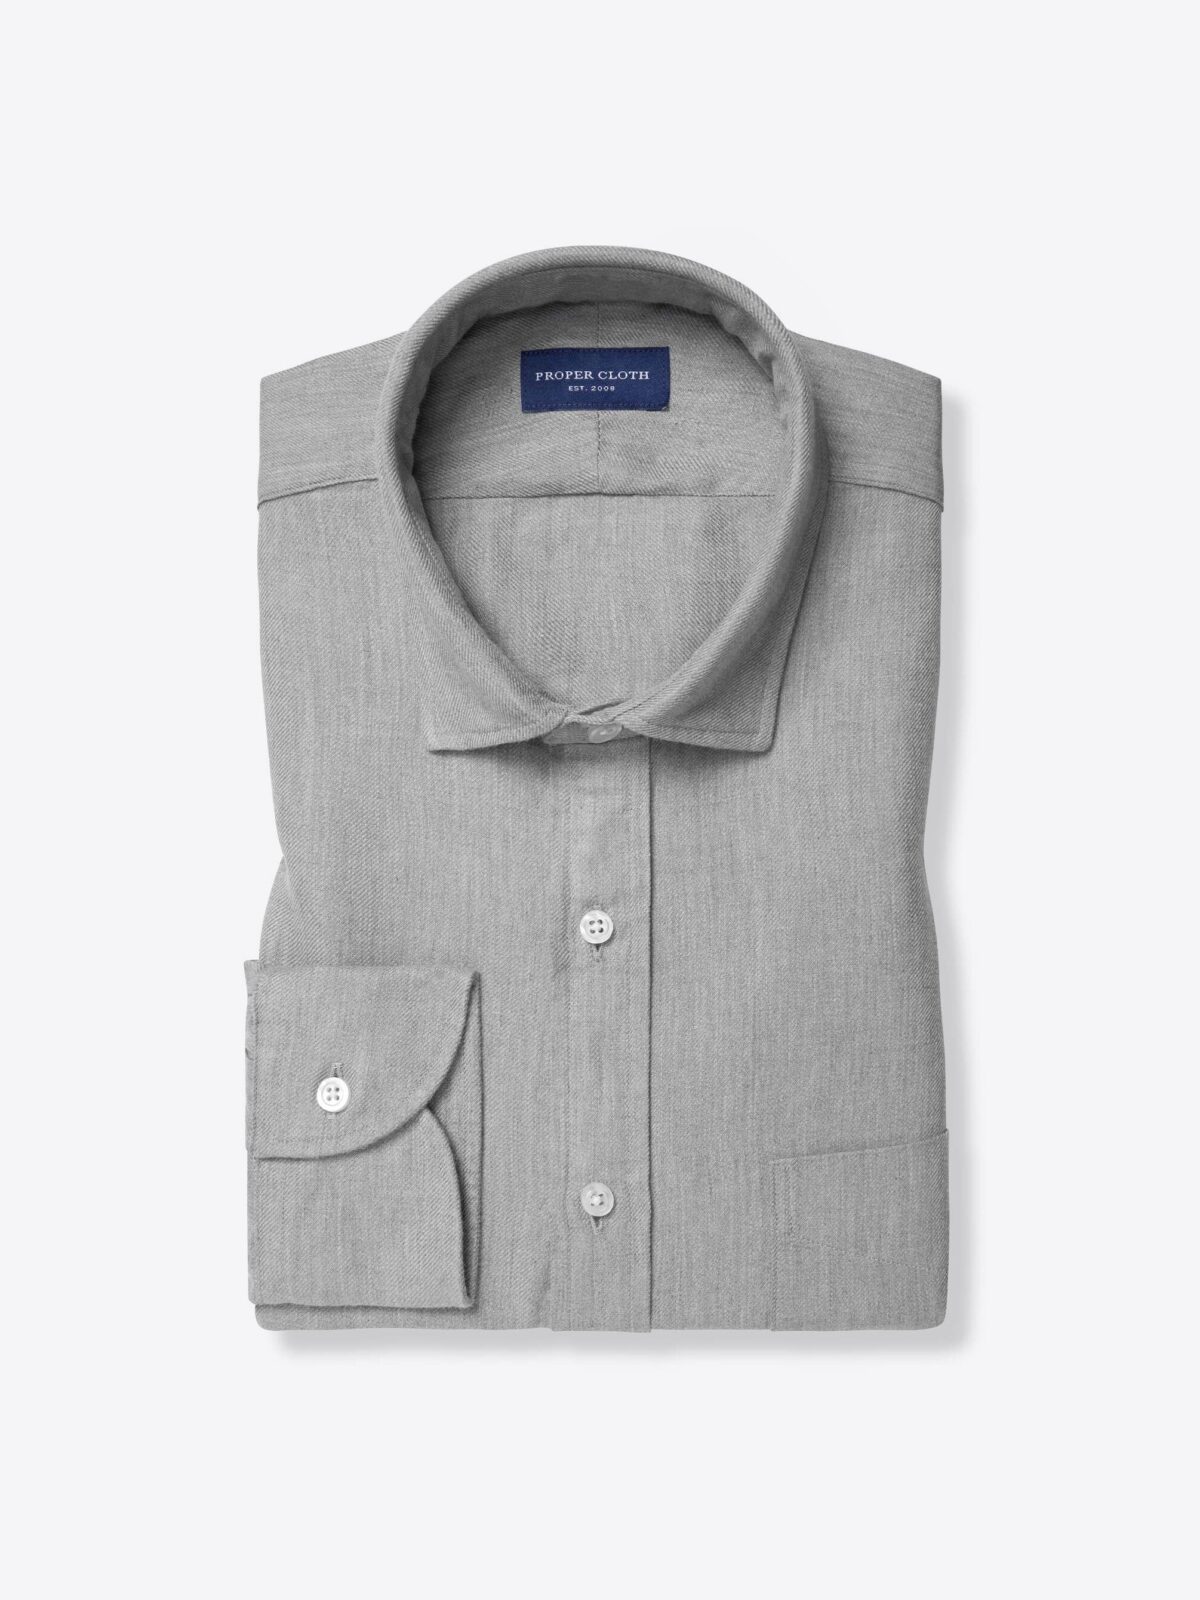 Sun Washed Grey Cotton and Linen Twill Shirt by Proper Cloth